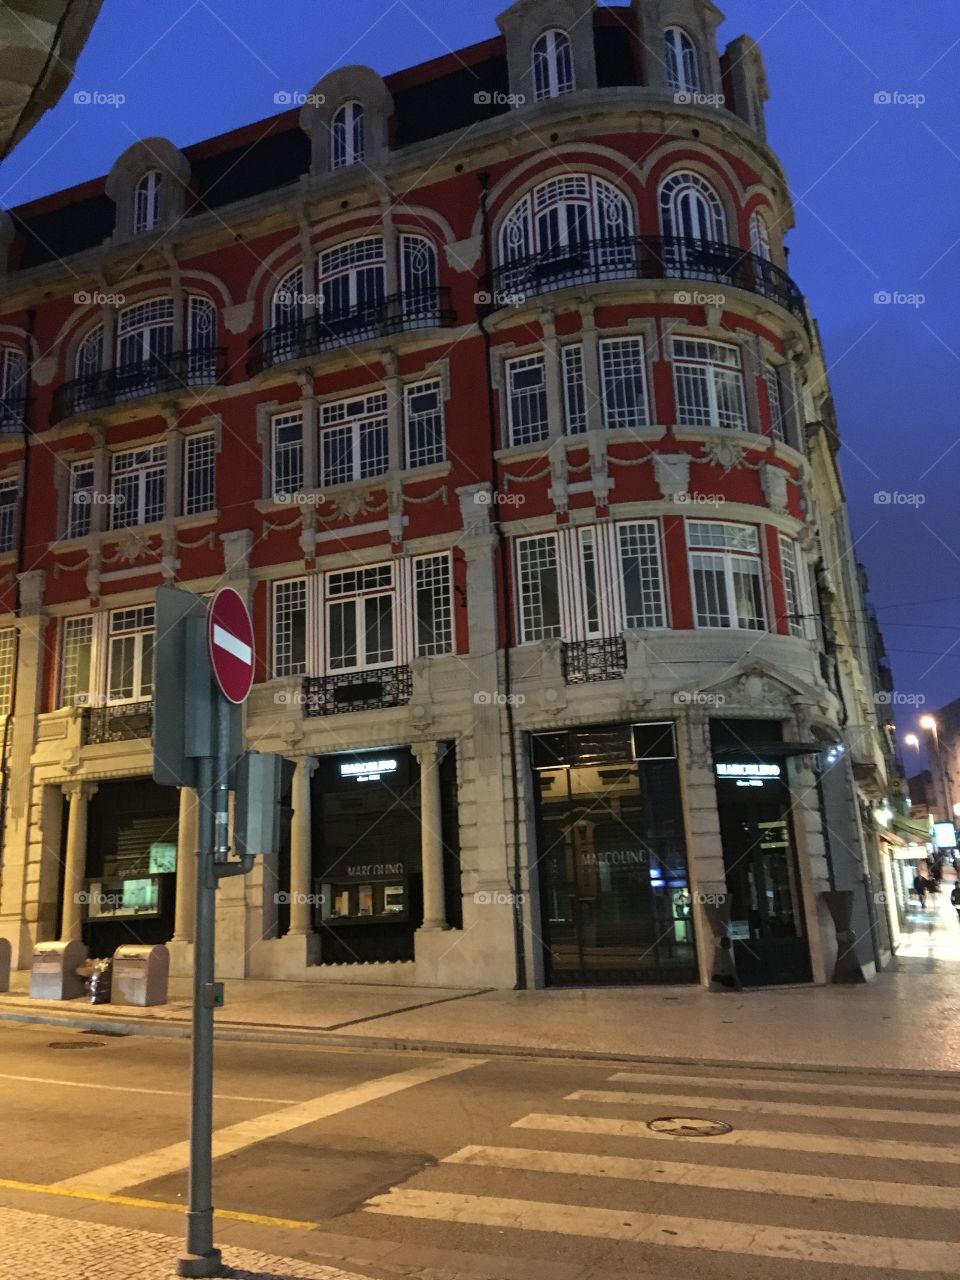 Building in Portugal 